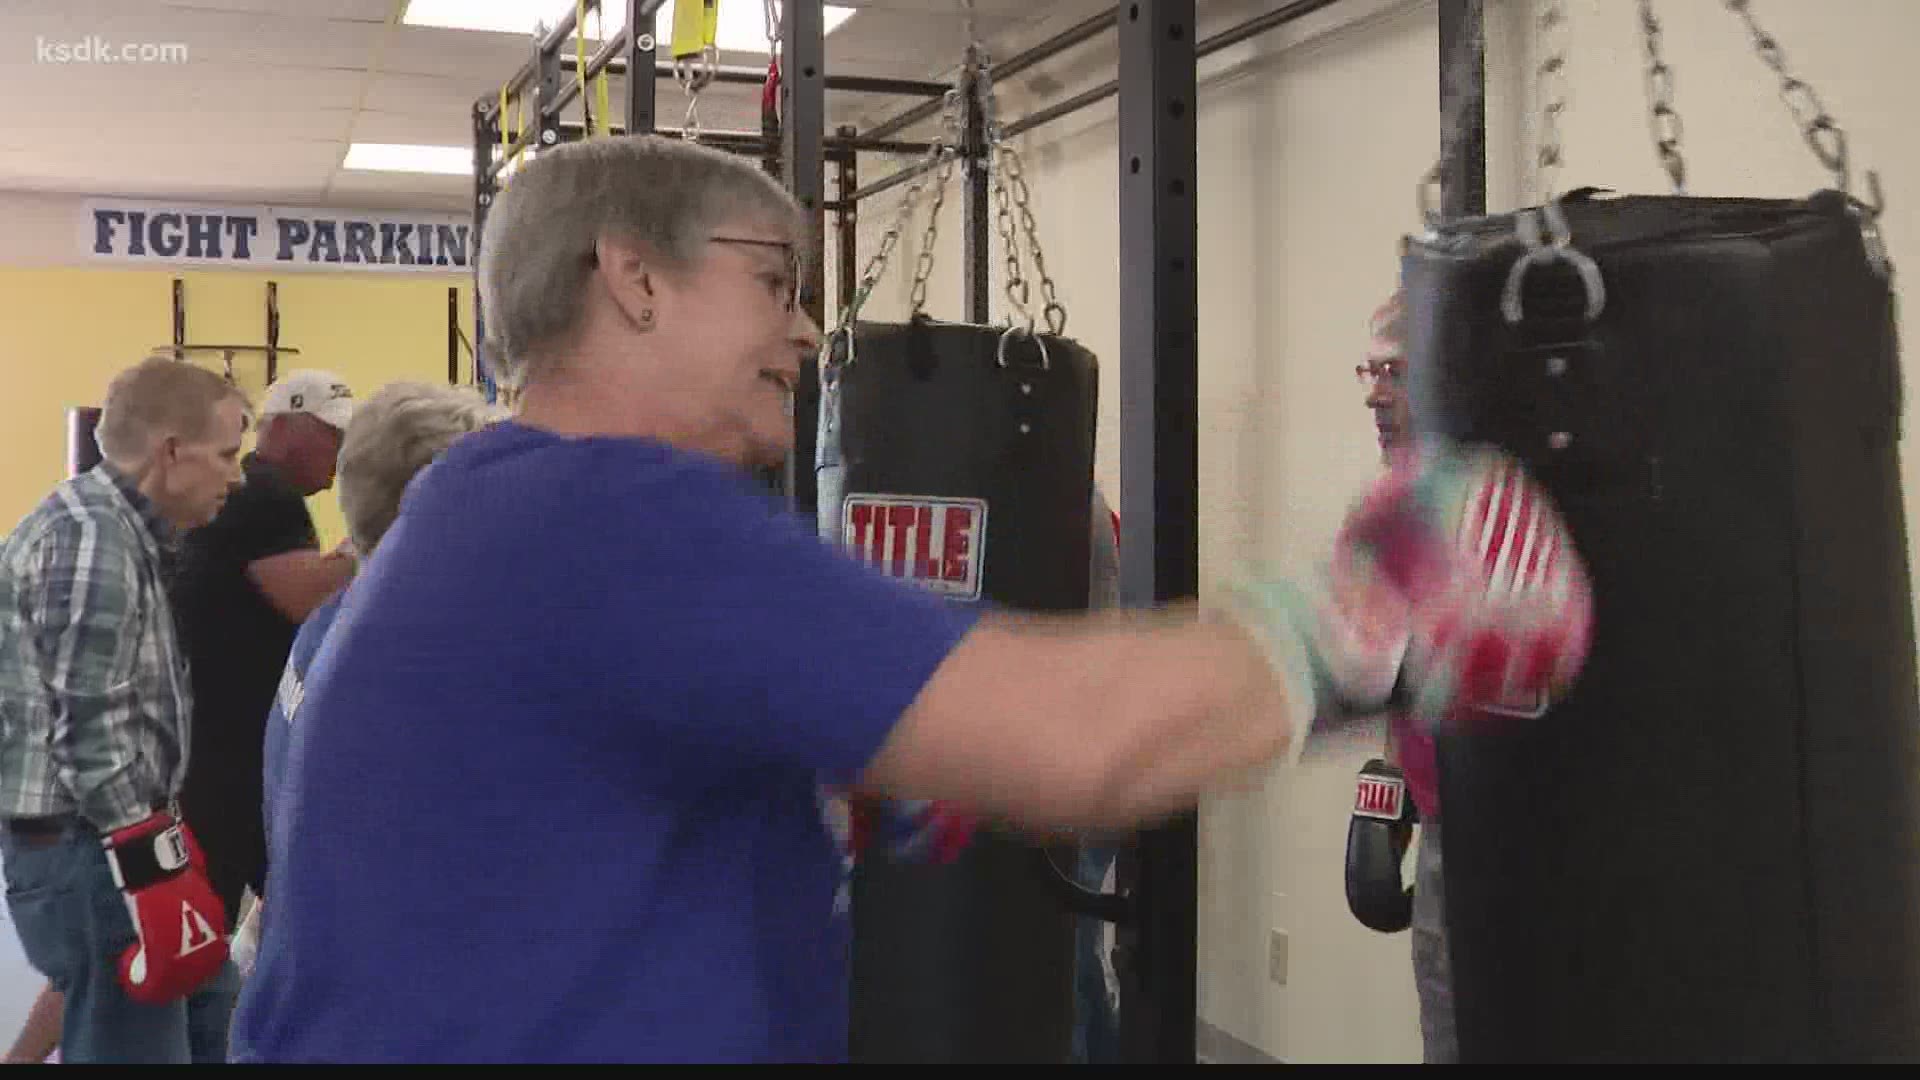 Boxing therapy helps Parkinson's patients gain better balance and mobility